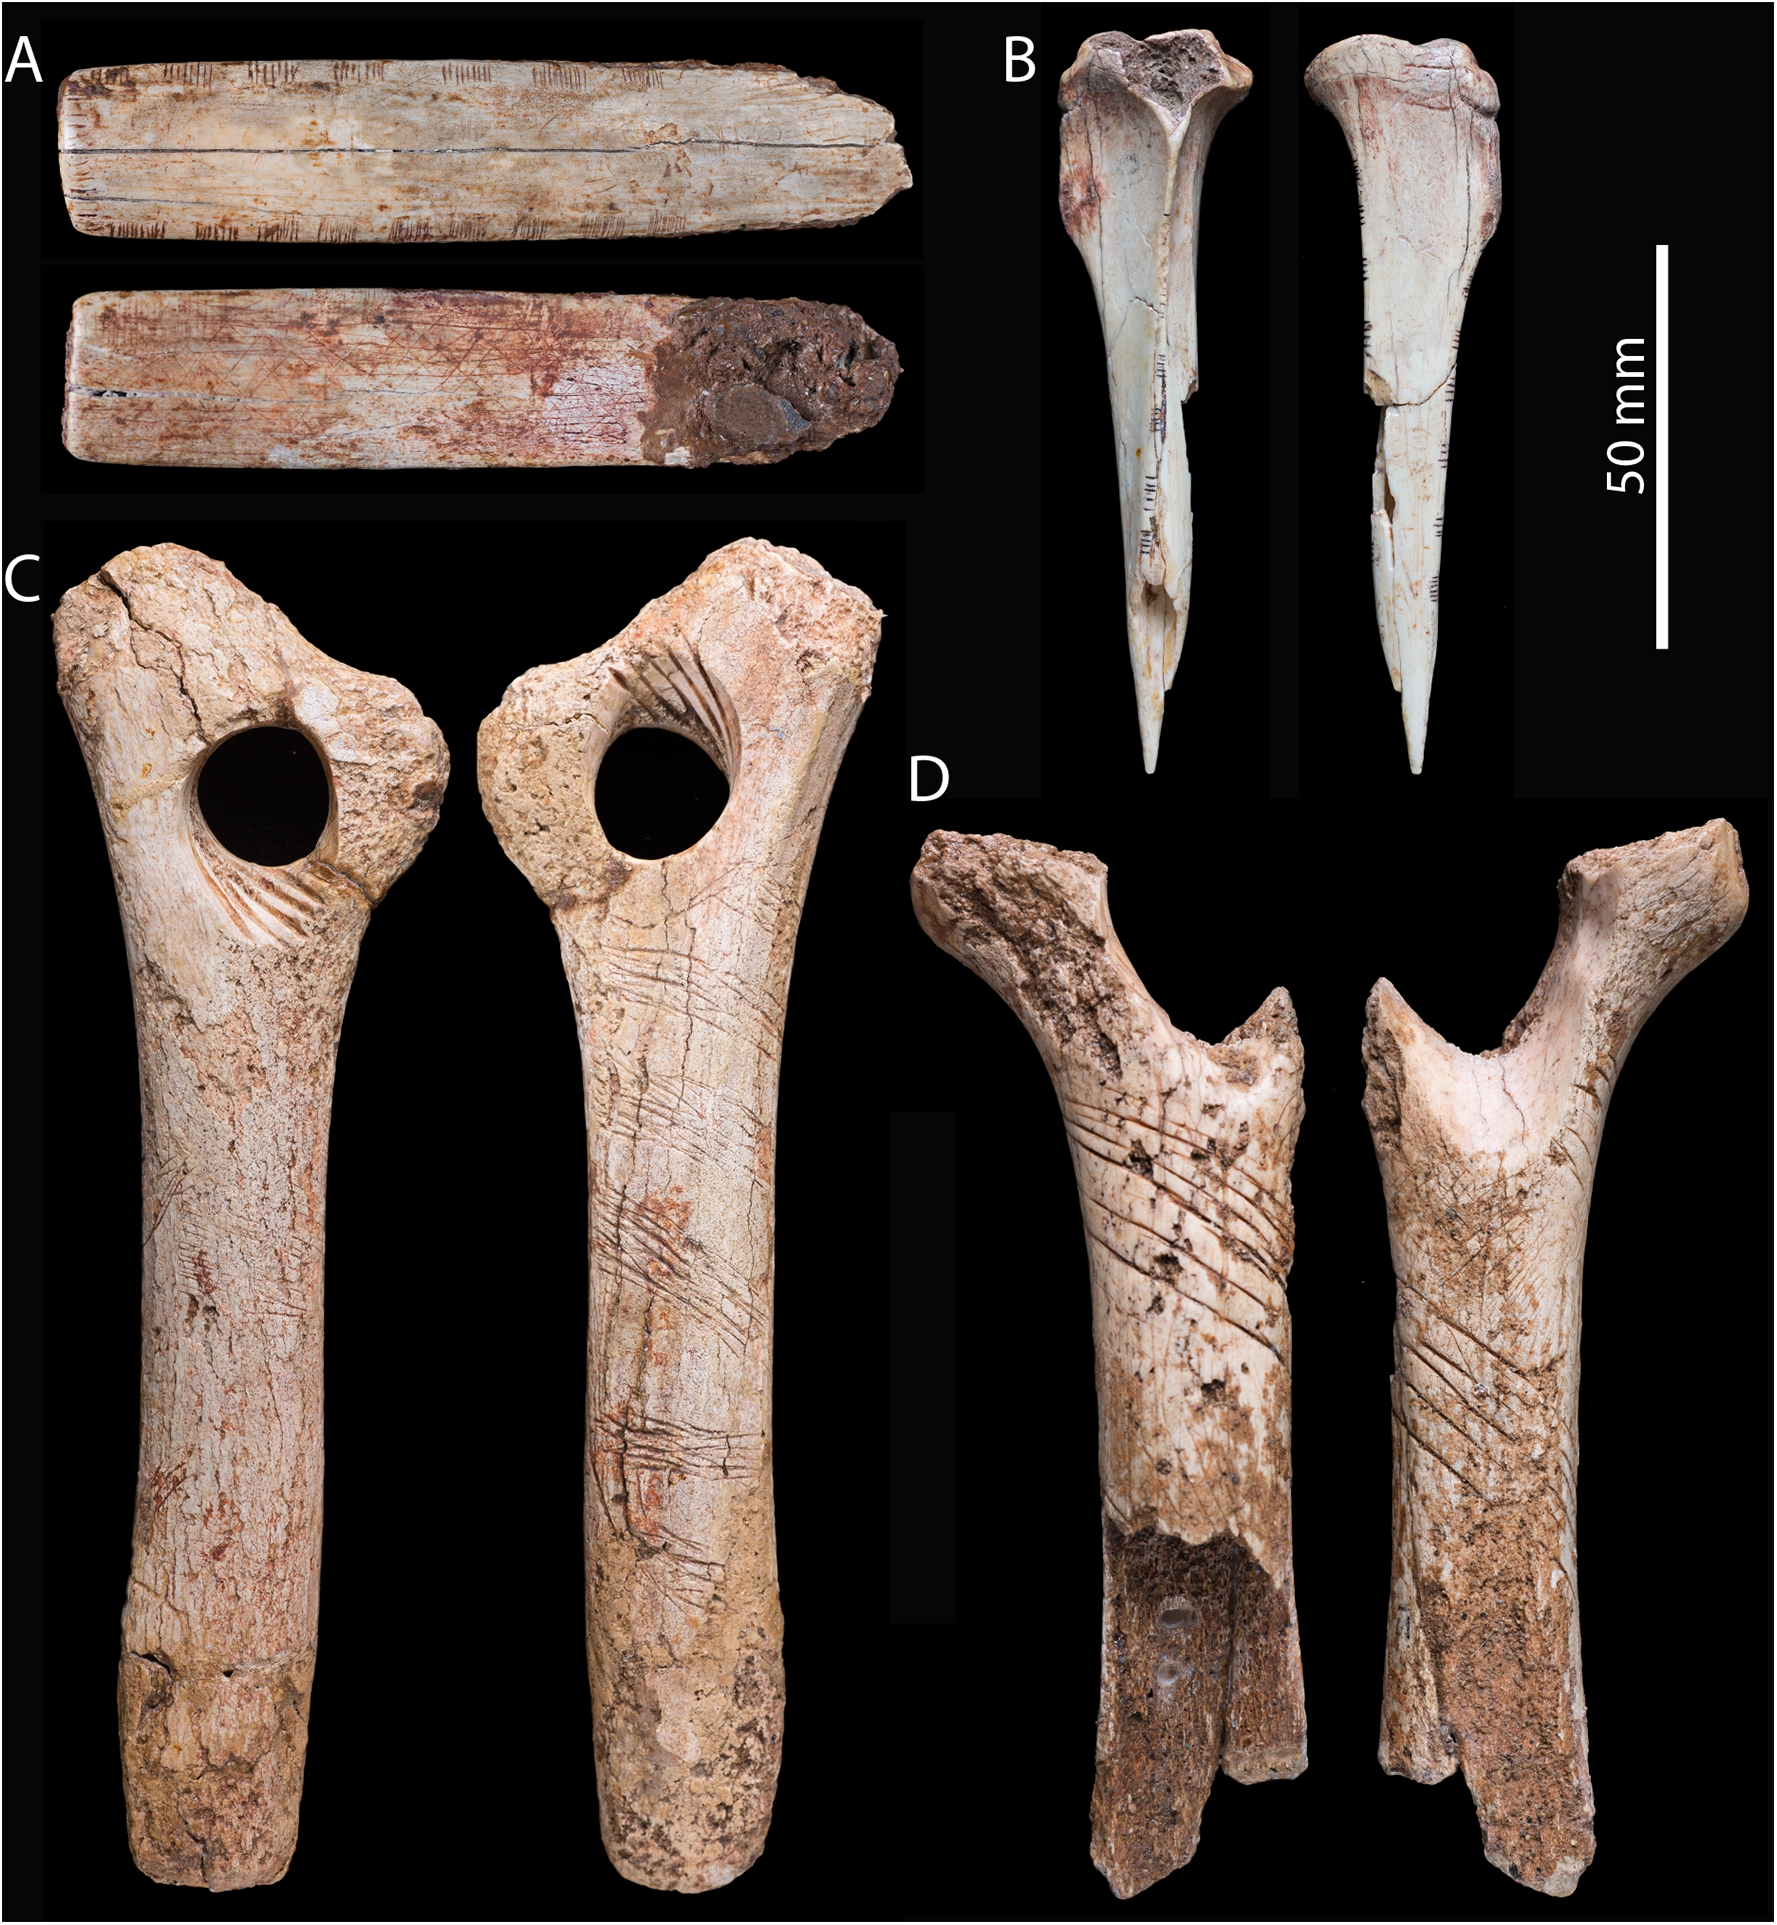 The History Blog » Blog Archive » Carved bones reveal Ice Age ritual ...